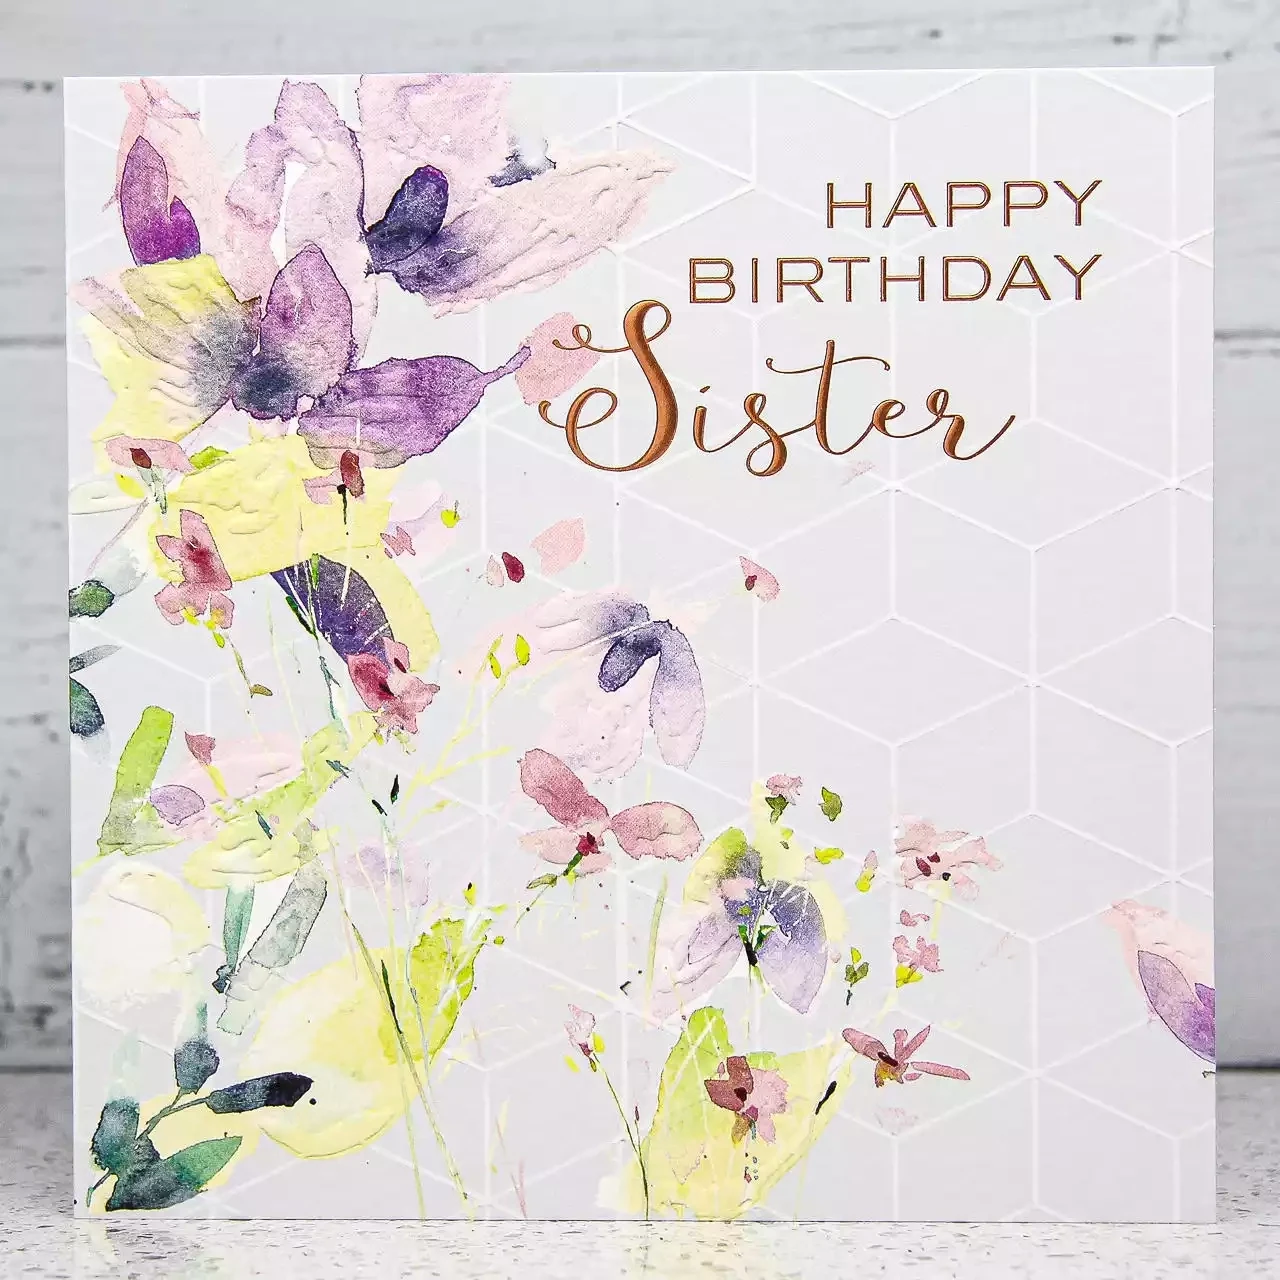 Happy Birthday Sister Card by Sarah Curedale